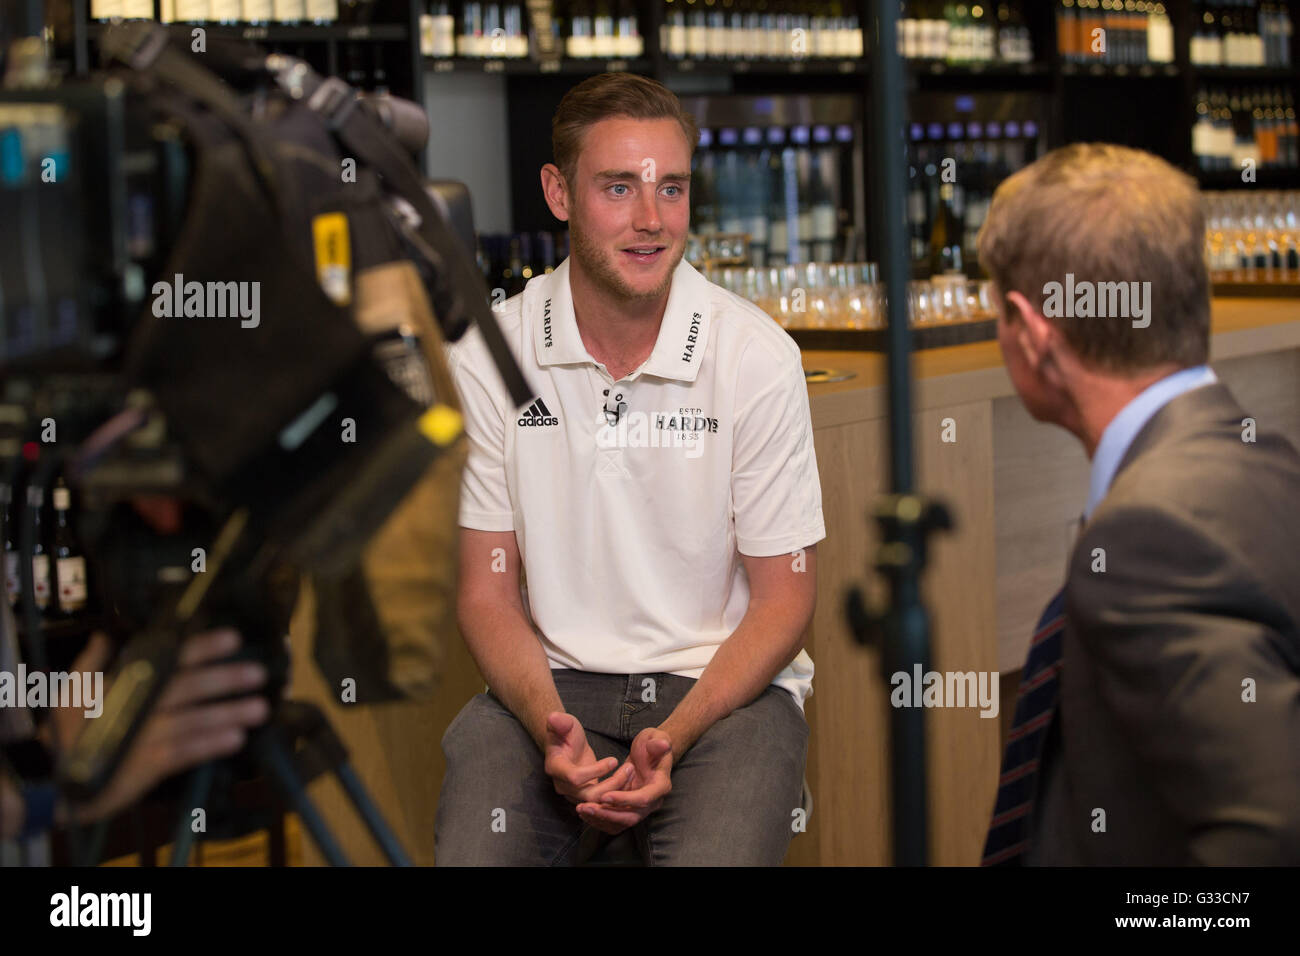 England Cricket player Stuart Broad interviewed at wine tasting event for Hardy's Wines in Weybridge, Great Britain June 6, 2016 Stock Photo